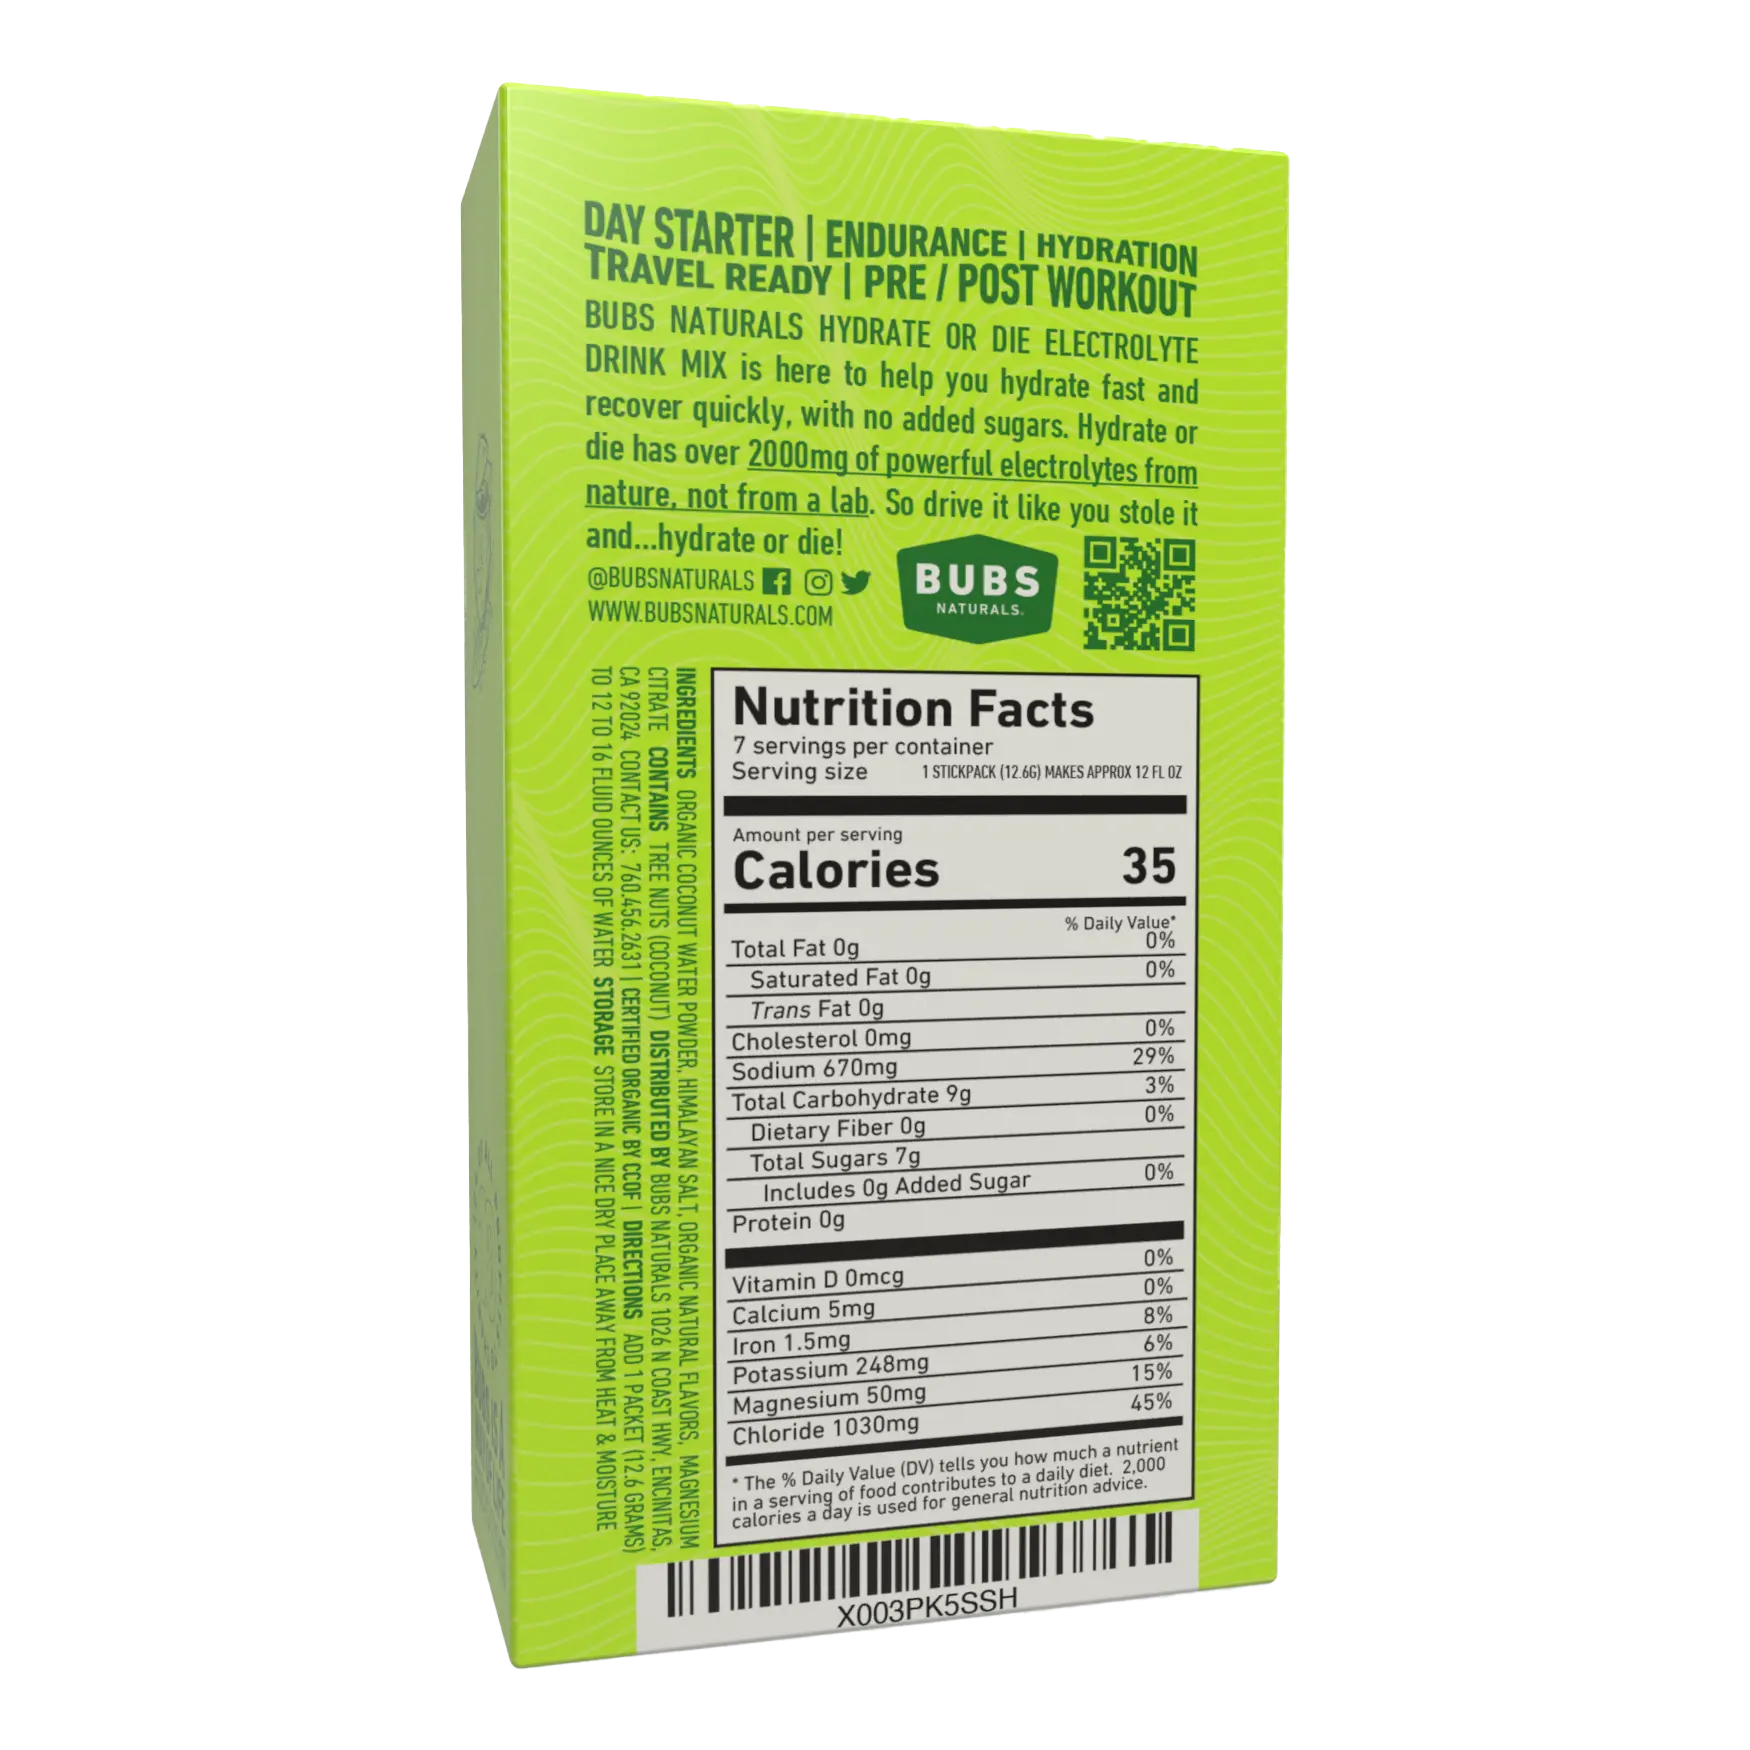 BUBS Naturals Hydrate Electrolyte or Die Cartons, Coconut Back Label